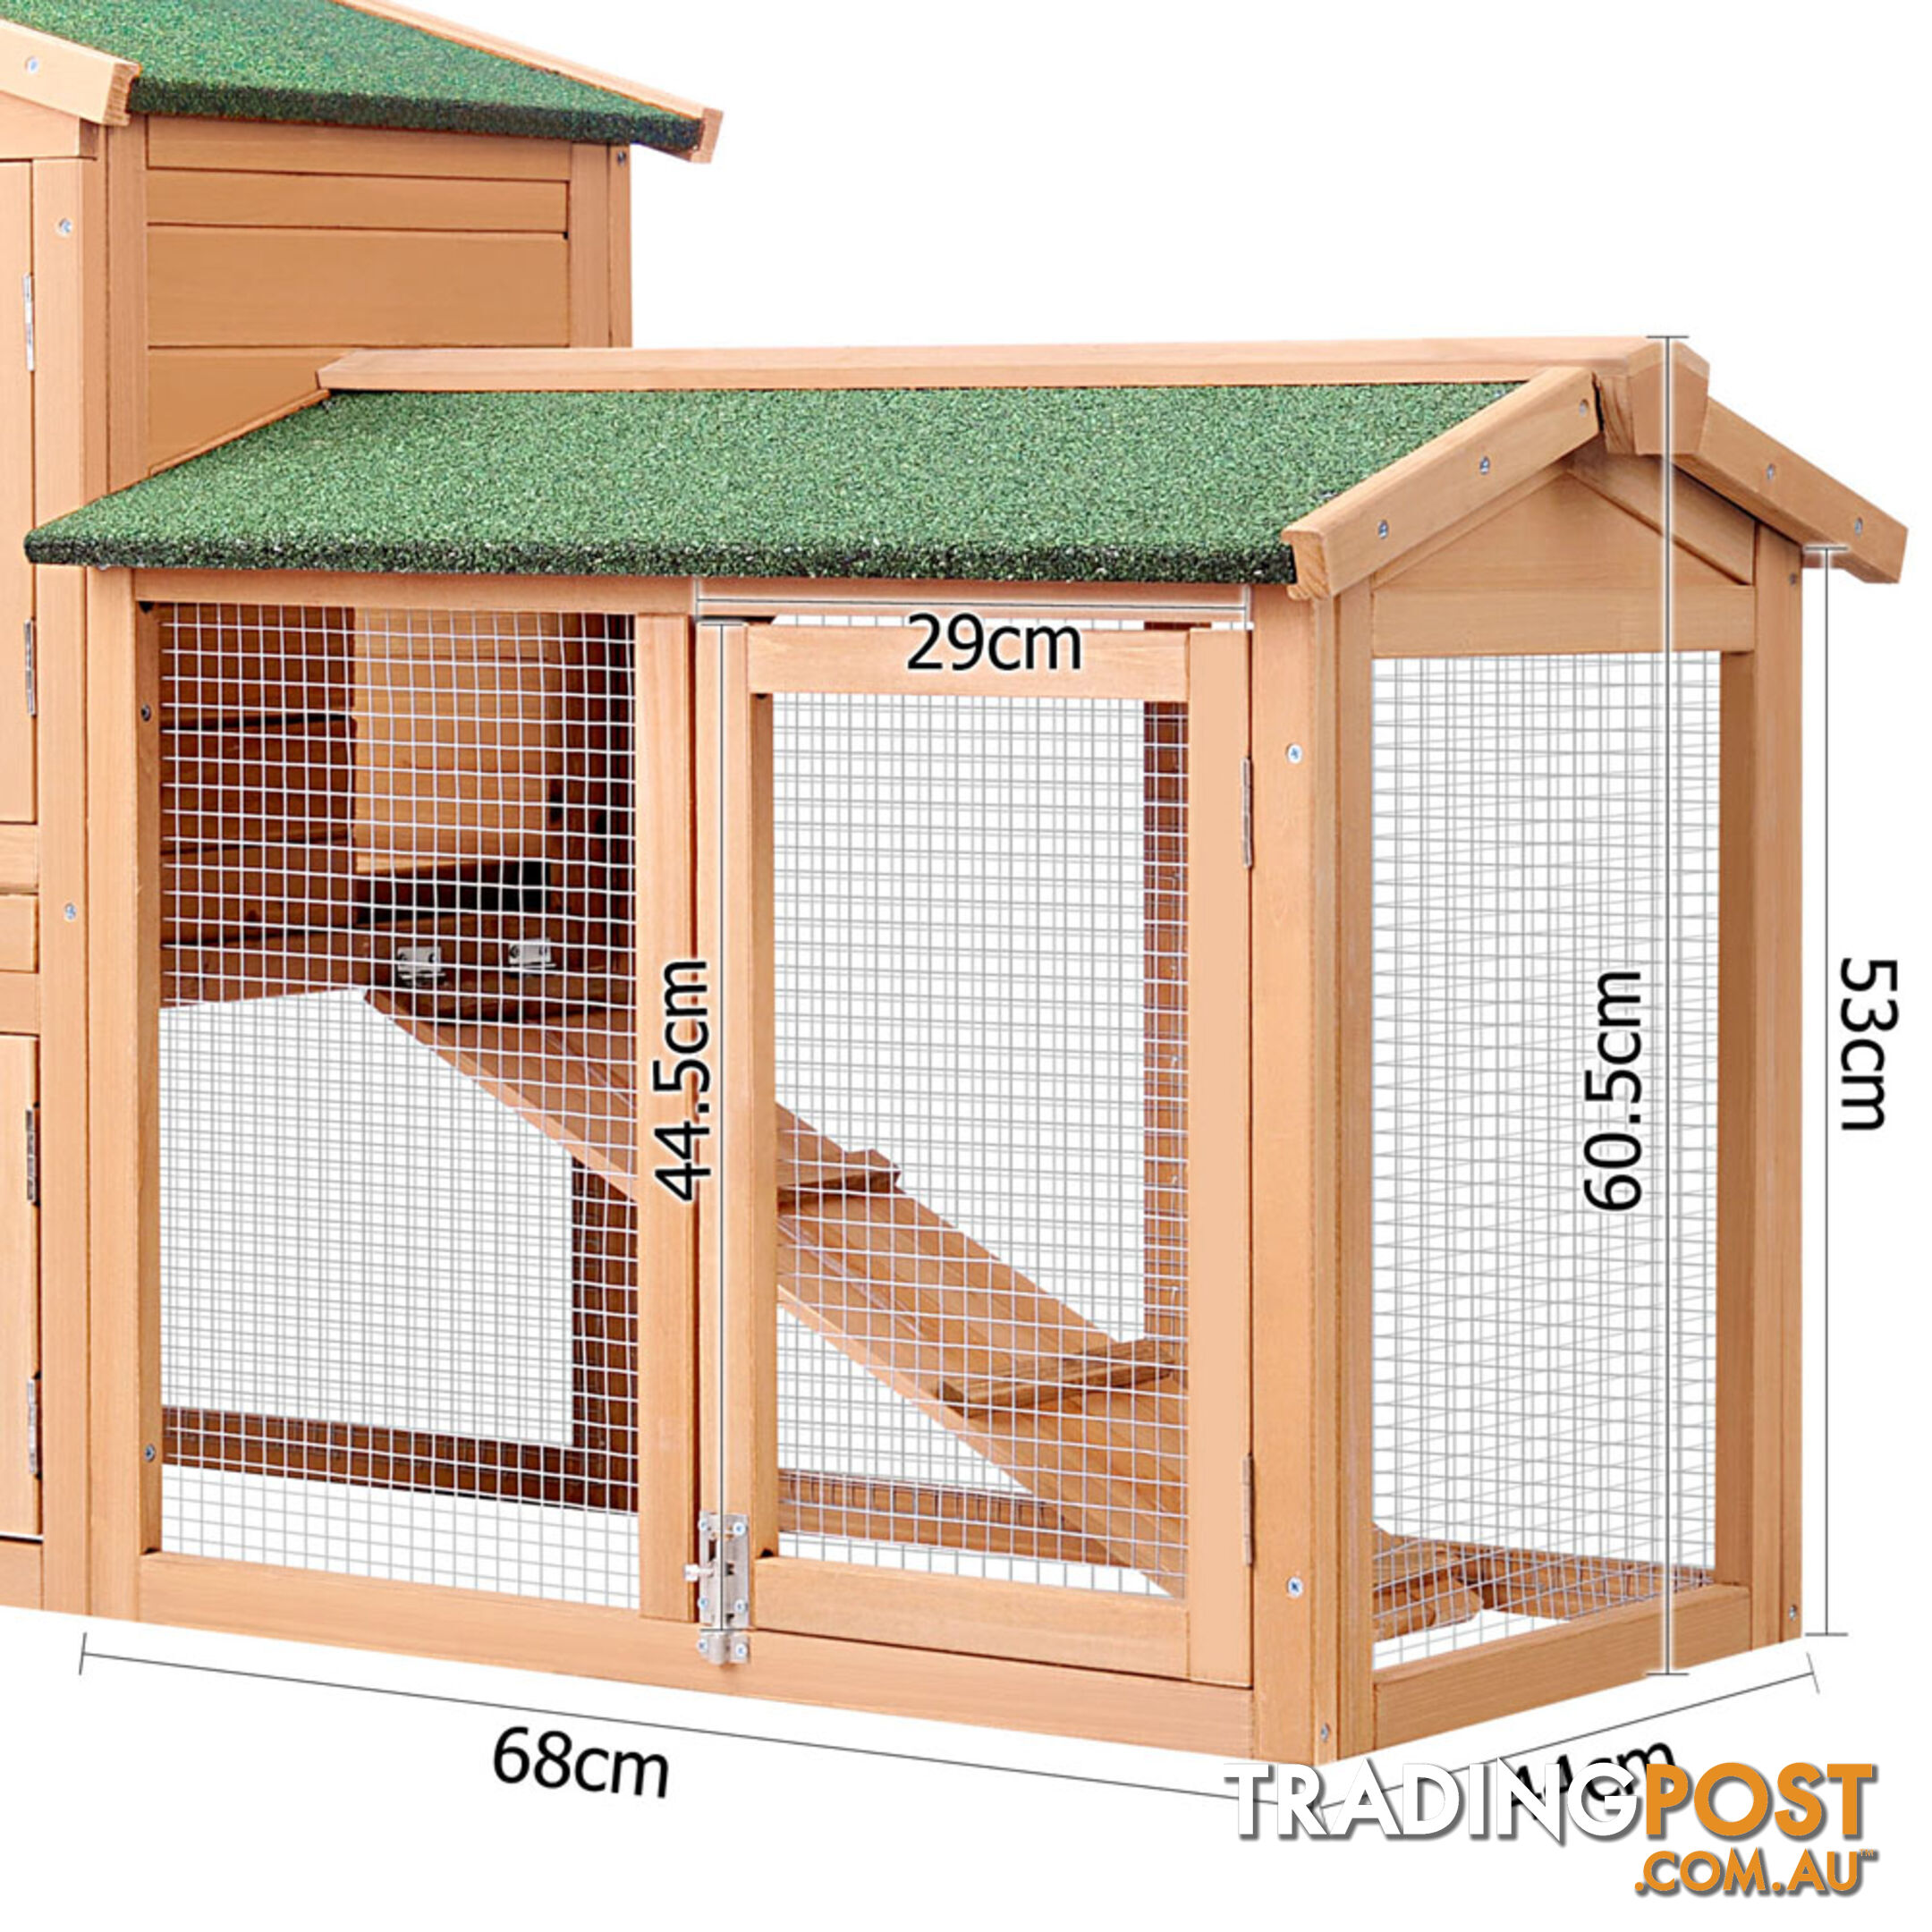 Rabbit Hutch Chicken Coop Cage Guinea Pig Ferret House With 2 Storeys Run